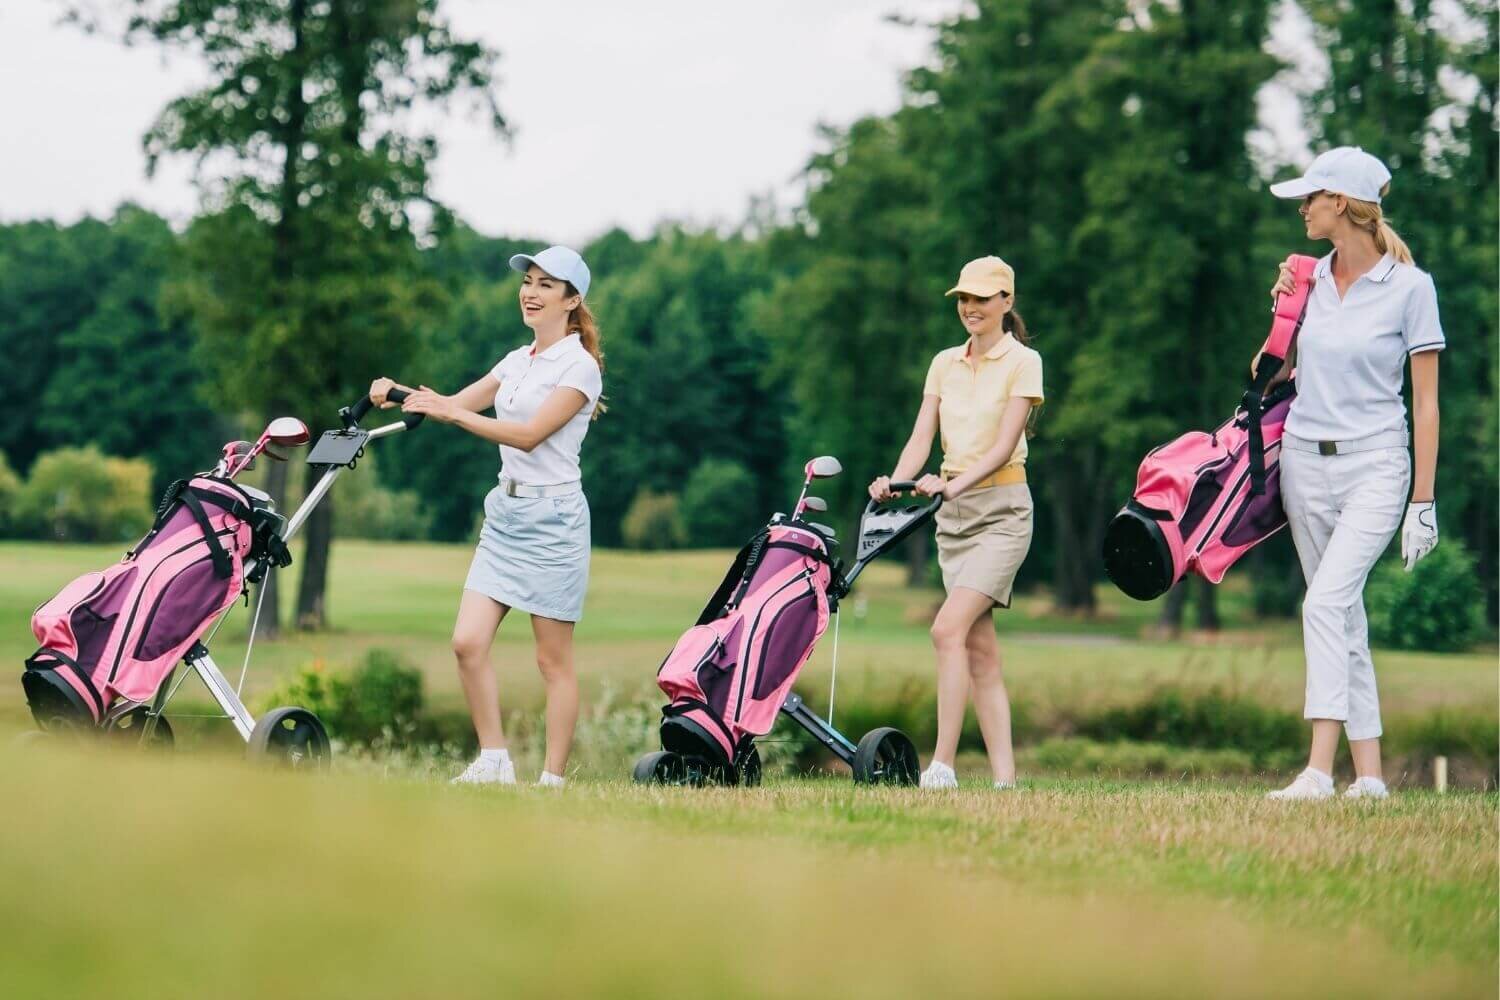 Three women golfers wearing different outfits carrying golf equipment